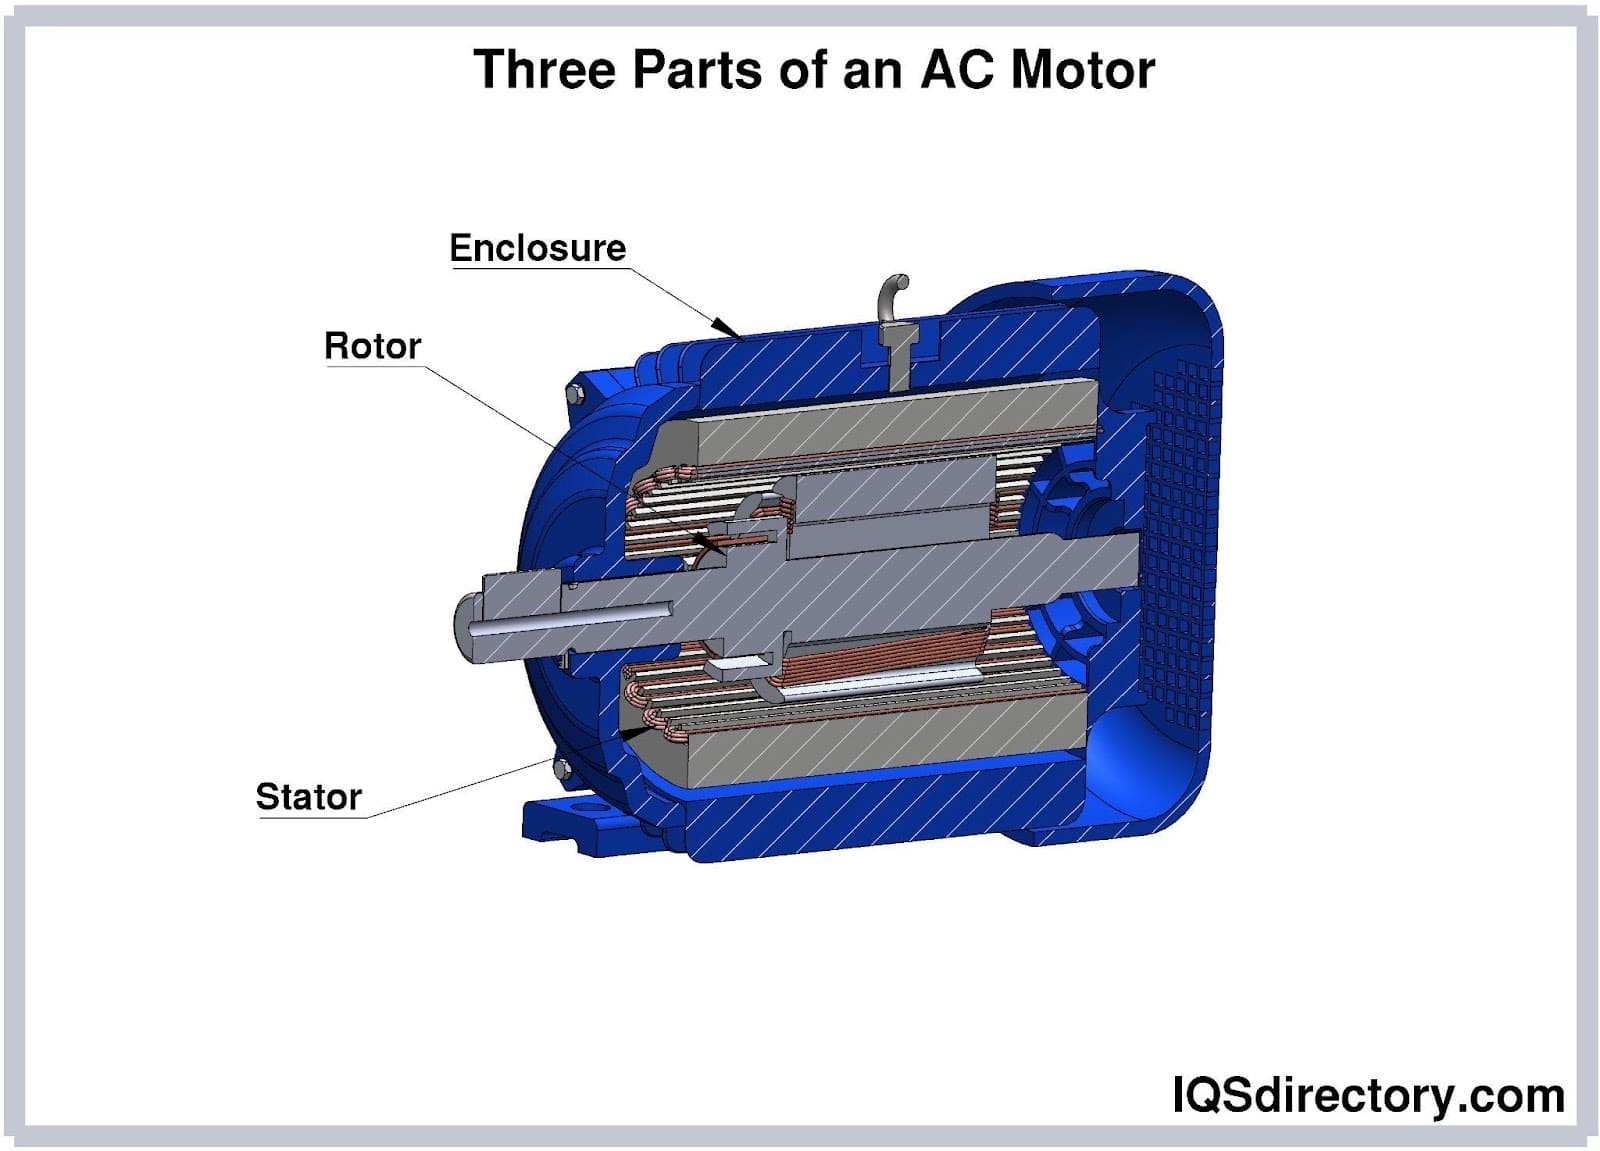 Three Parts of an AC Motor